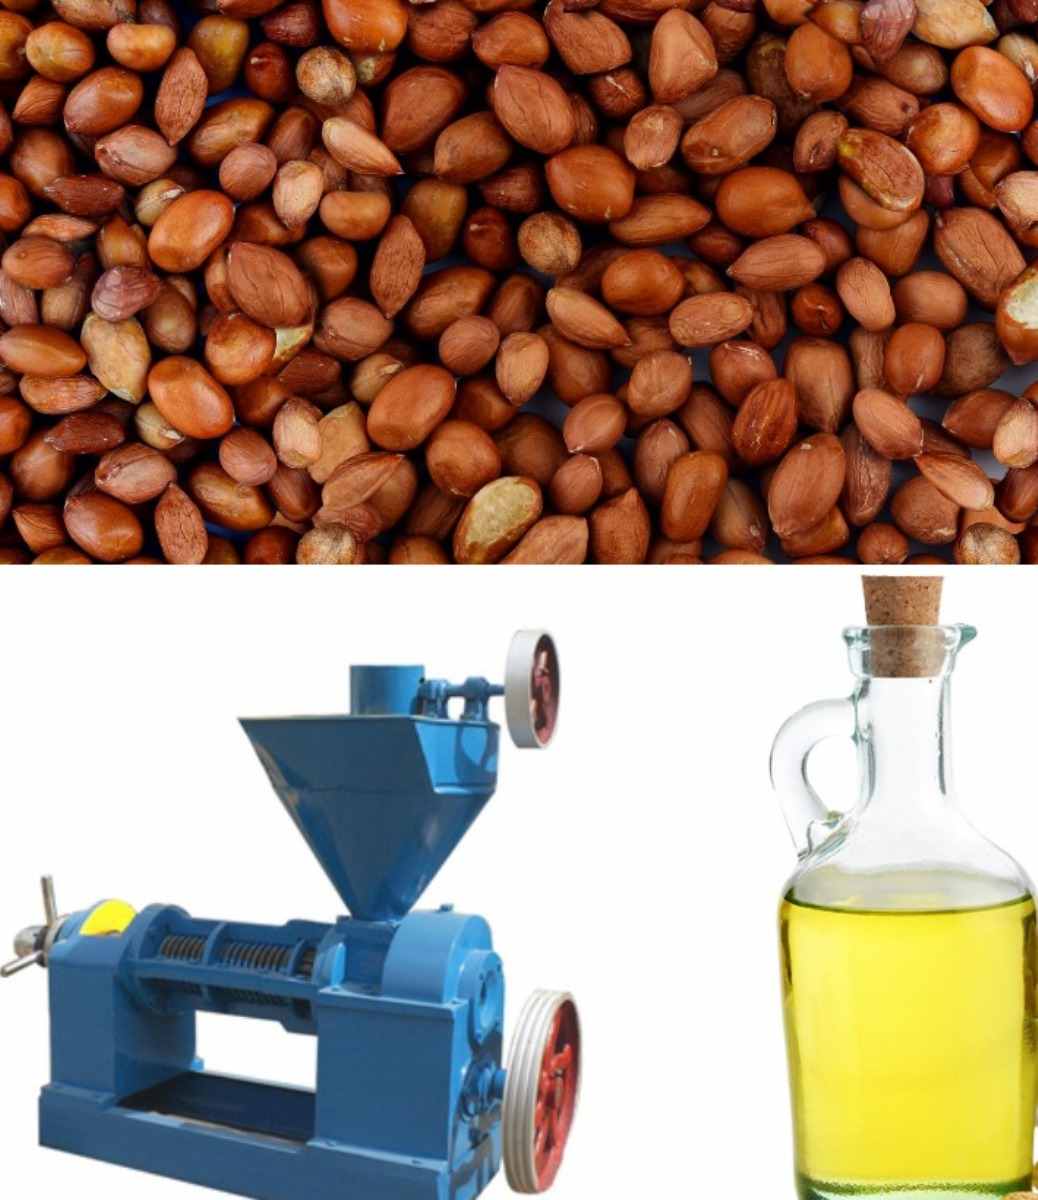 An extraction procedure and manufacturing of Groundnut oil.